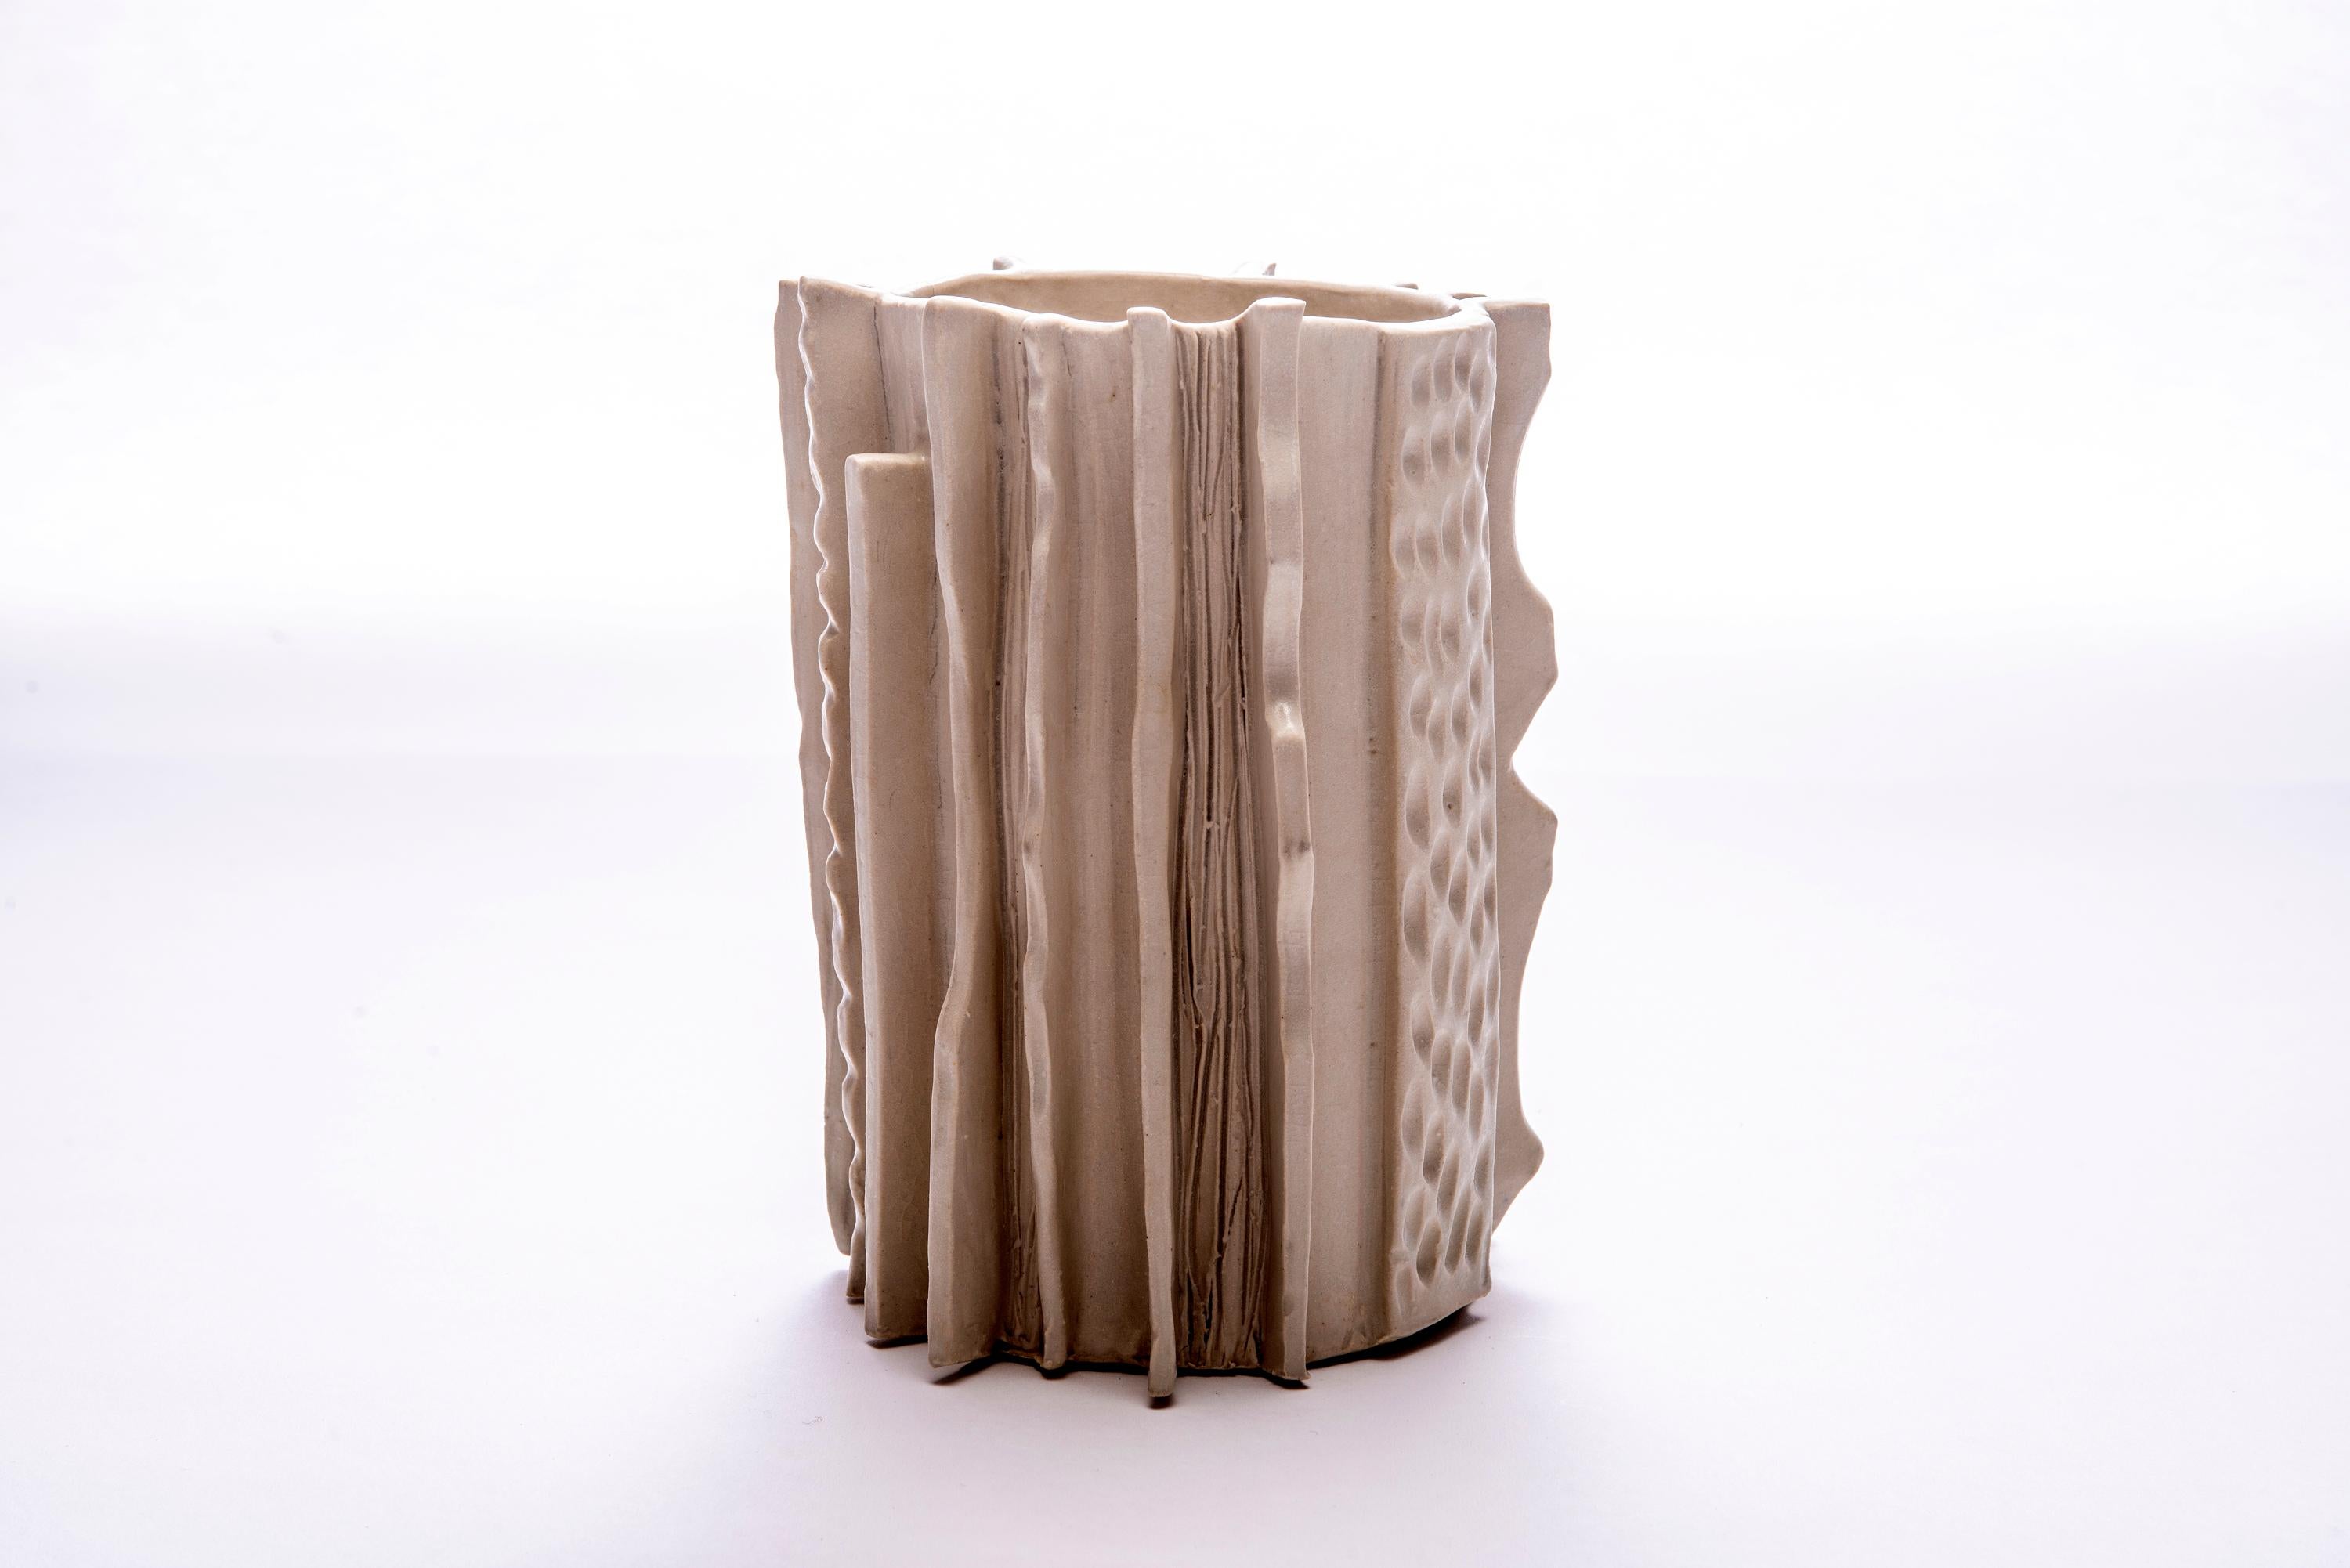 Trish DeMasi
Marcello, 2020
Glazed Ceramics
8 x 6 x 6 in

The Moderno collection by Trish DeMasi features geometric shapes, sumptuous textures and pleasing neutral colors in the form of glazed ceramic vessels and boxes.